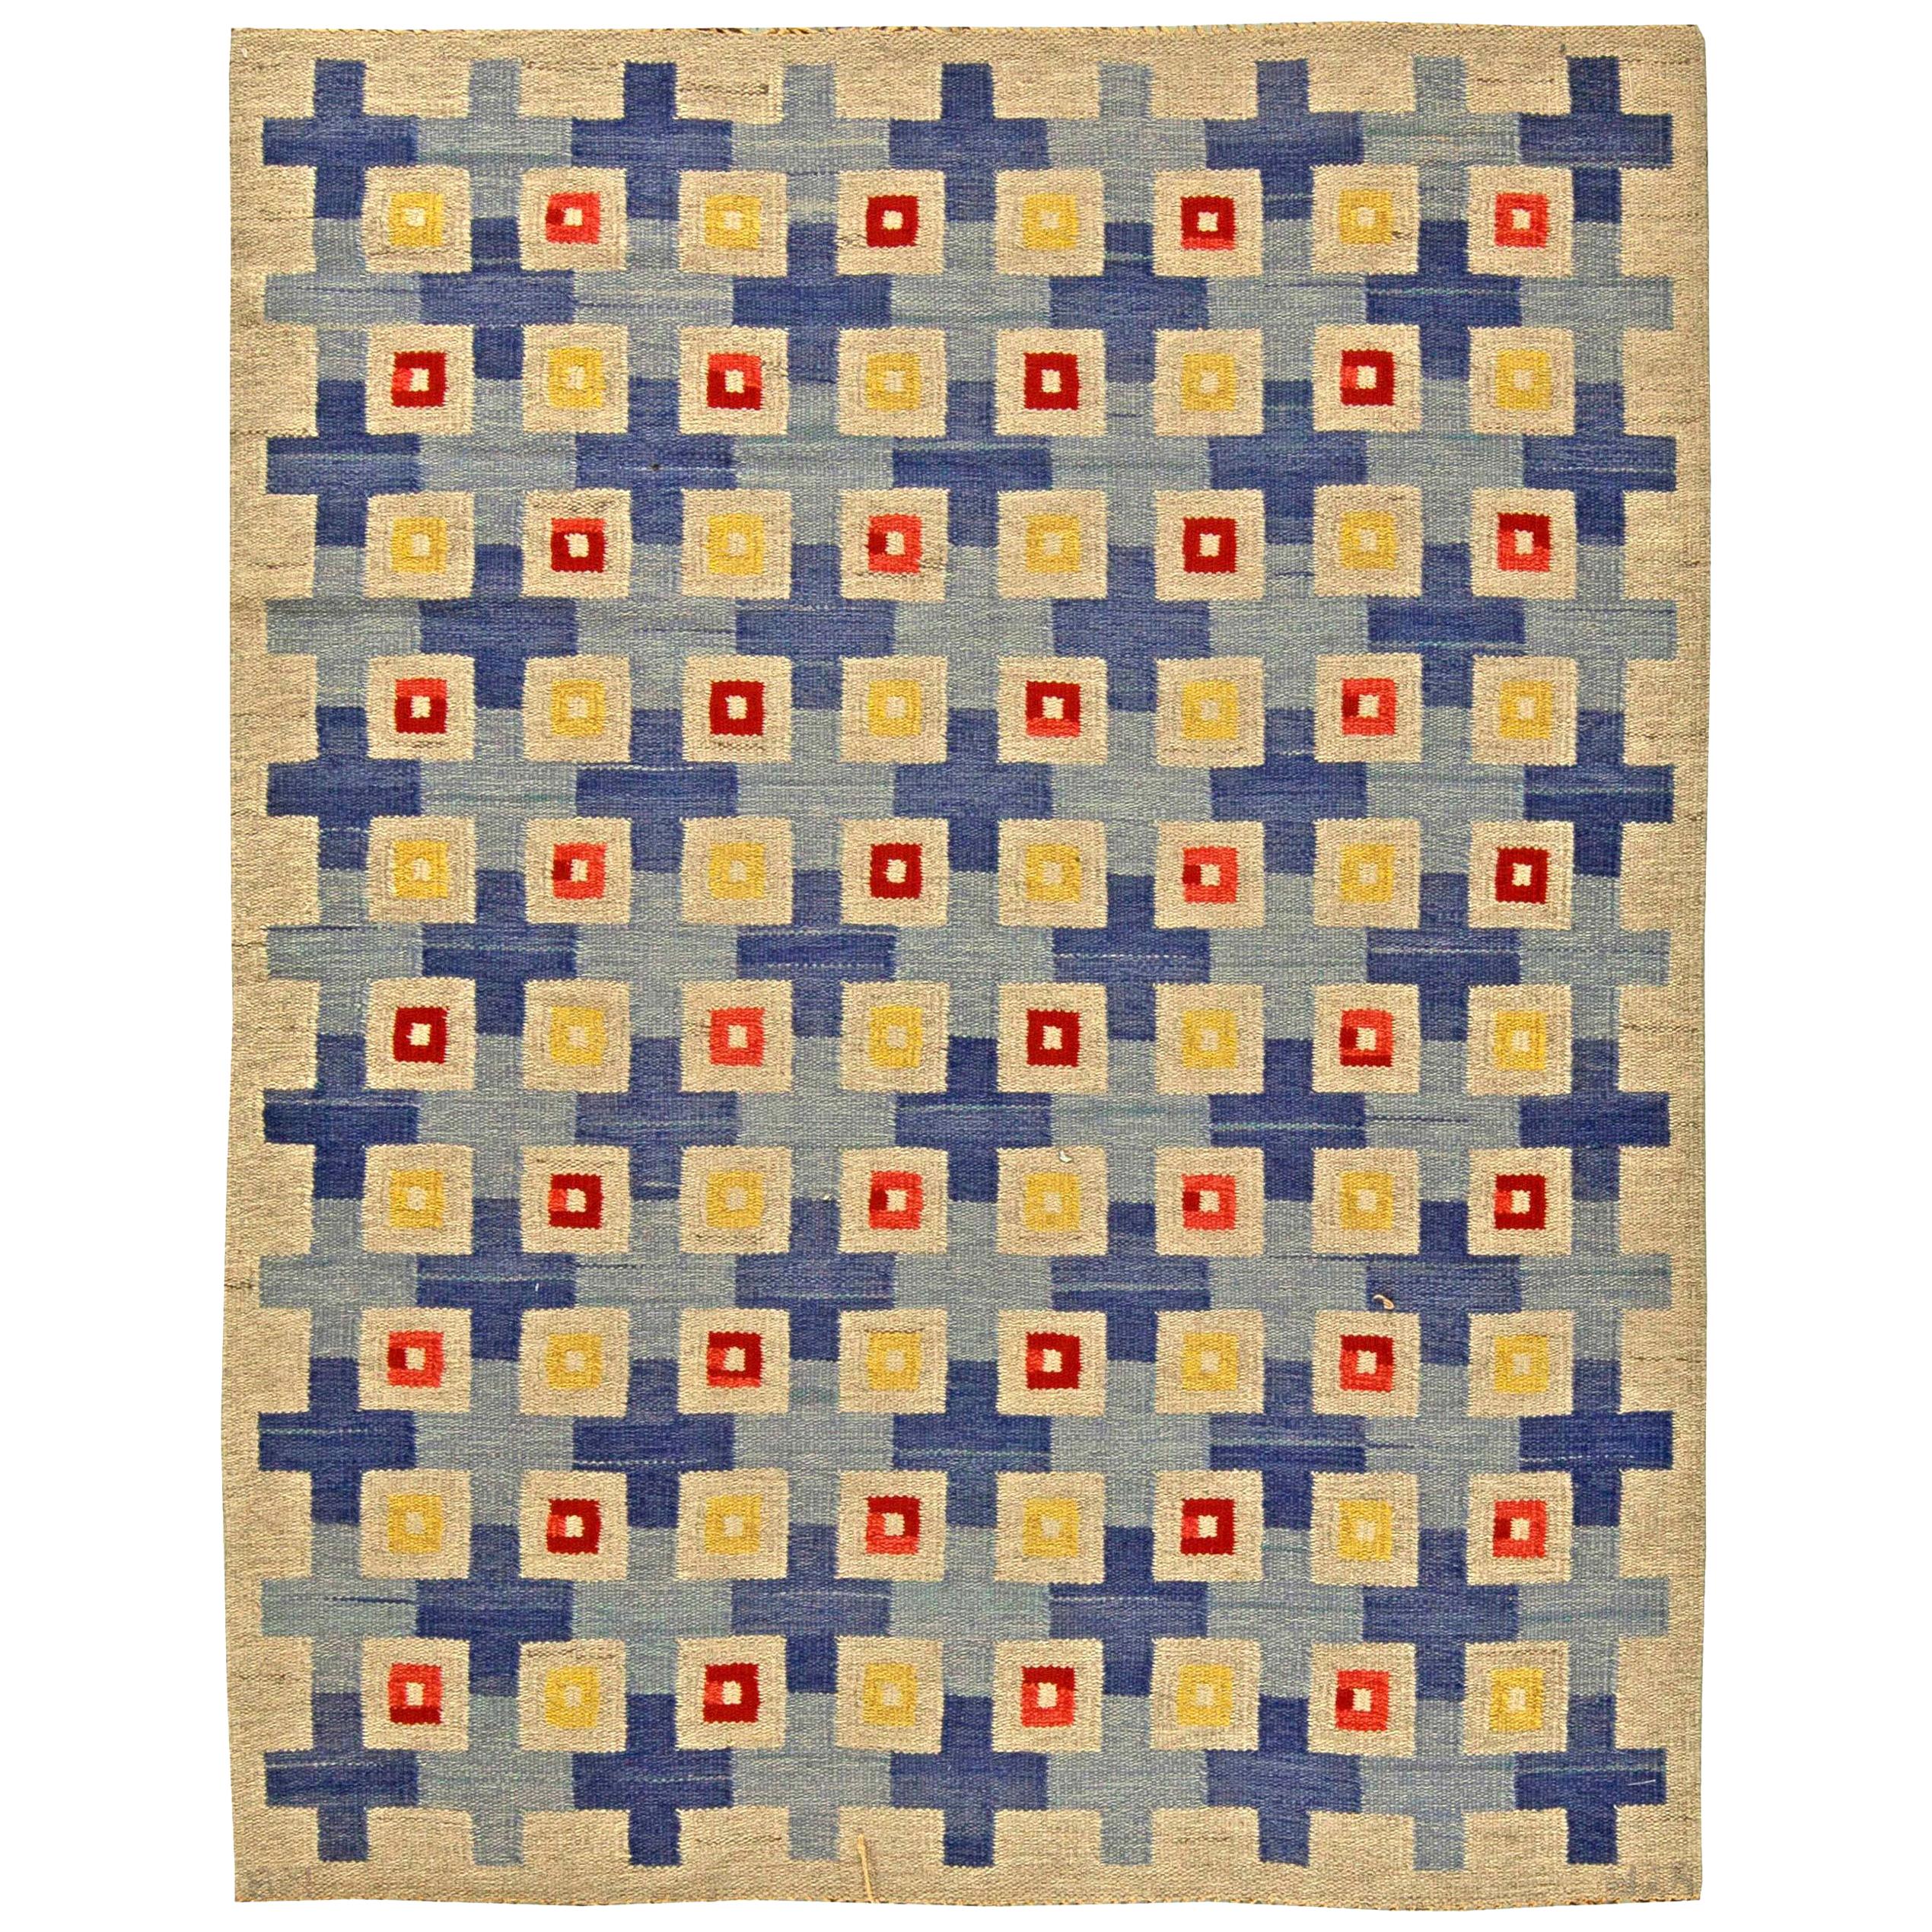 Midcentury Swedish Blue, Red, Yellow and Beige Flat-Woven Wool Rug